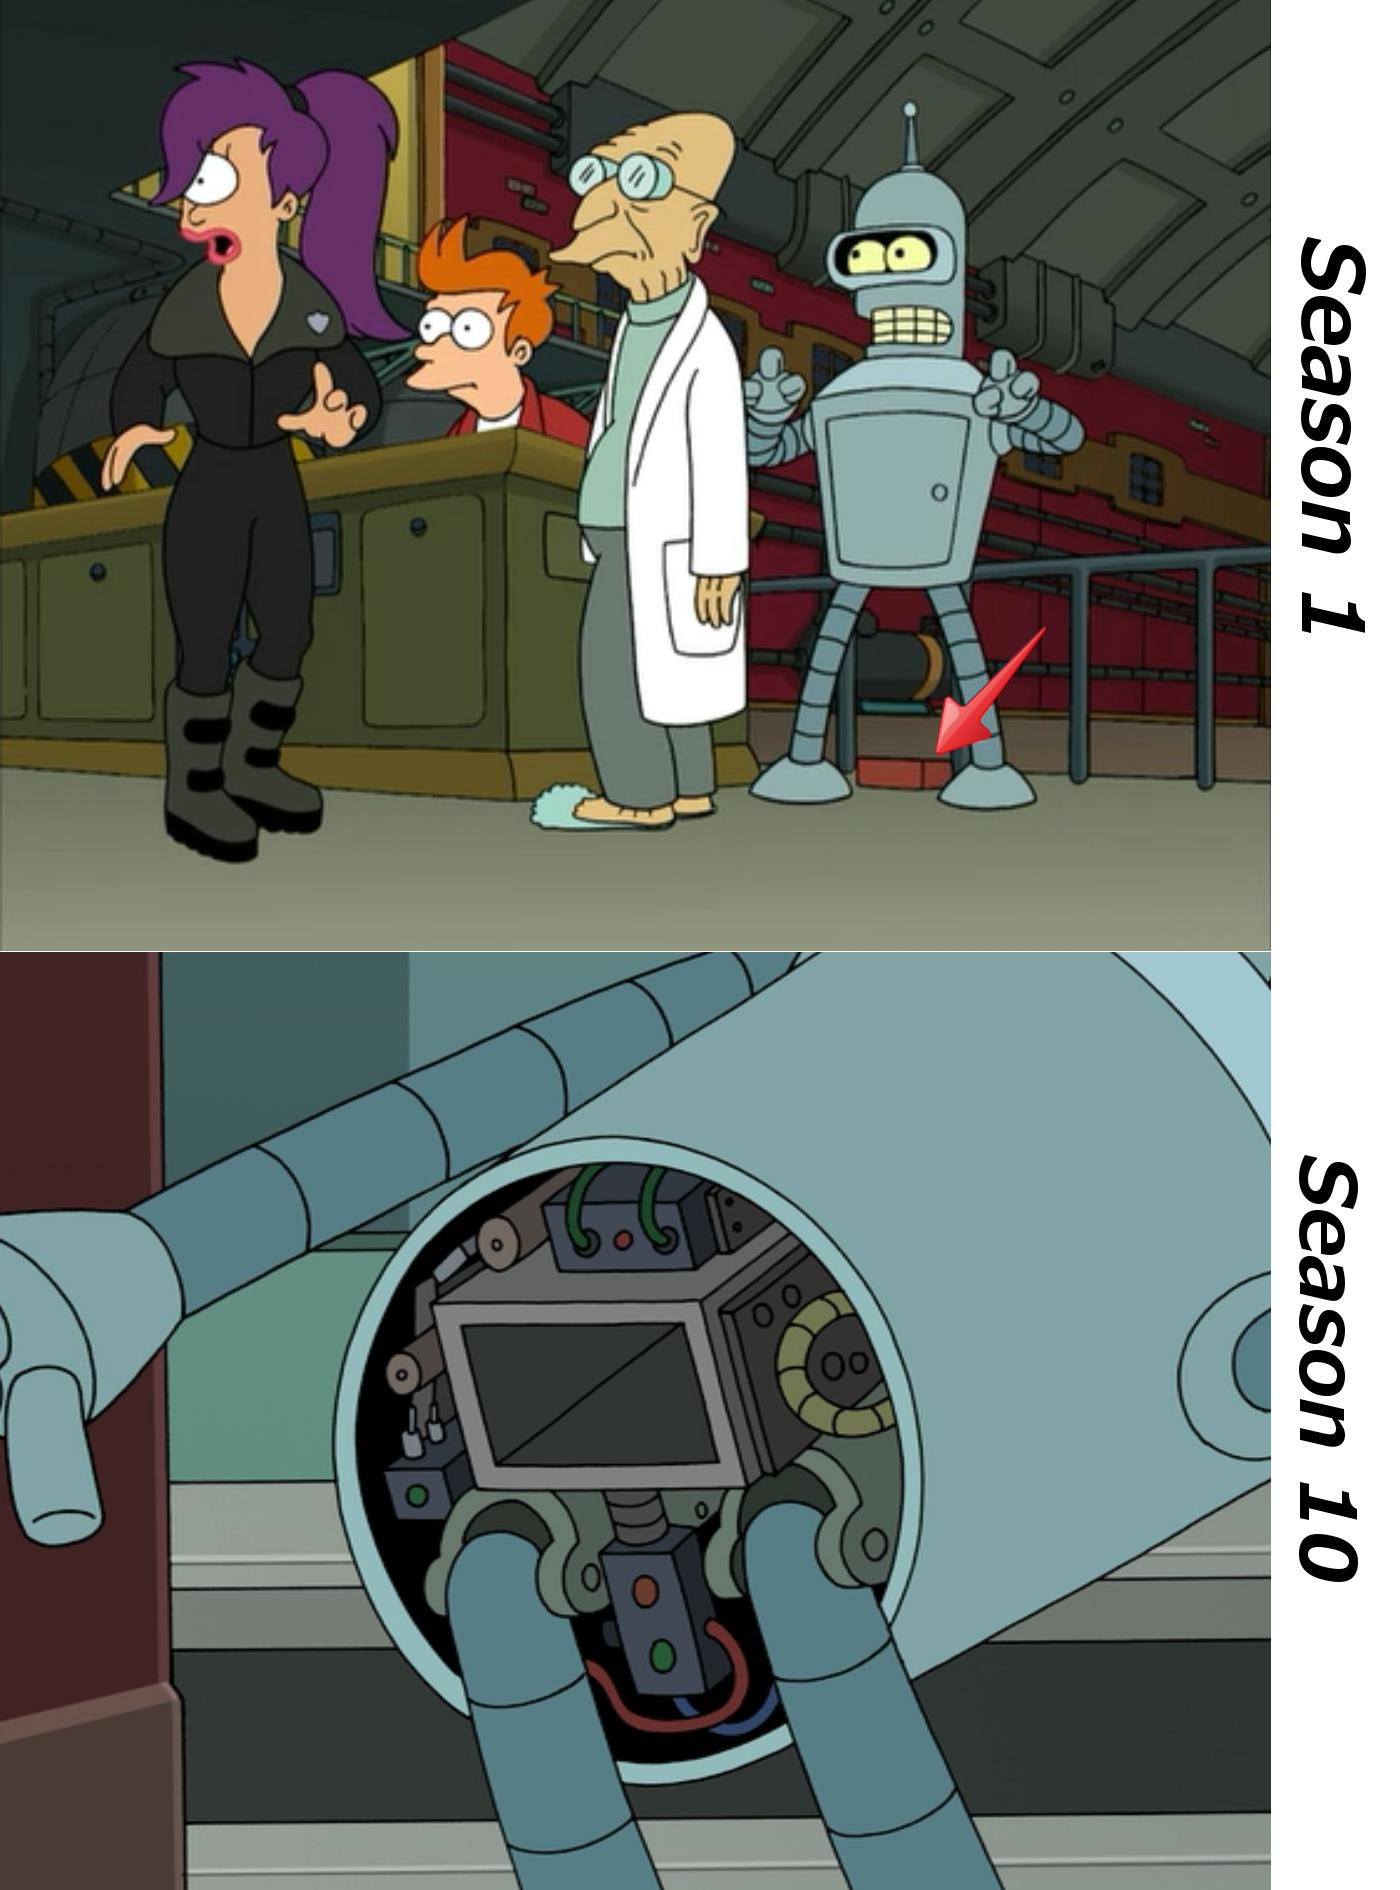 Bender sh*ts a brick in season one and reveals his brick-holder in season ten. Continuity, bitches!